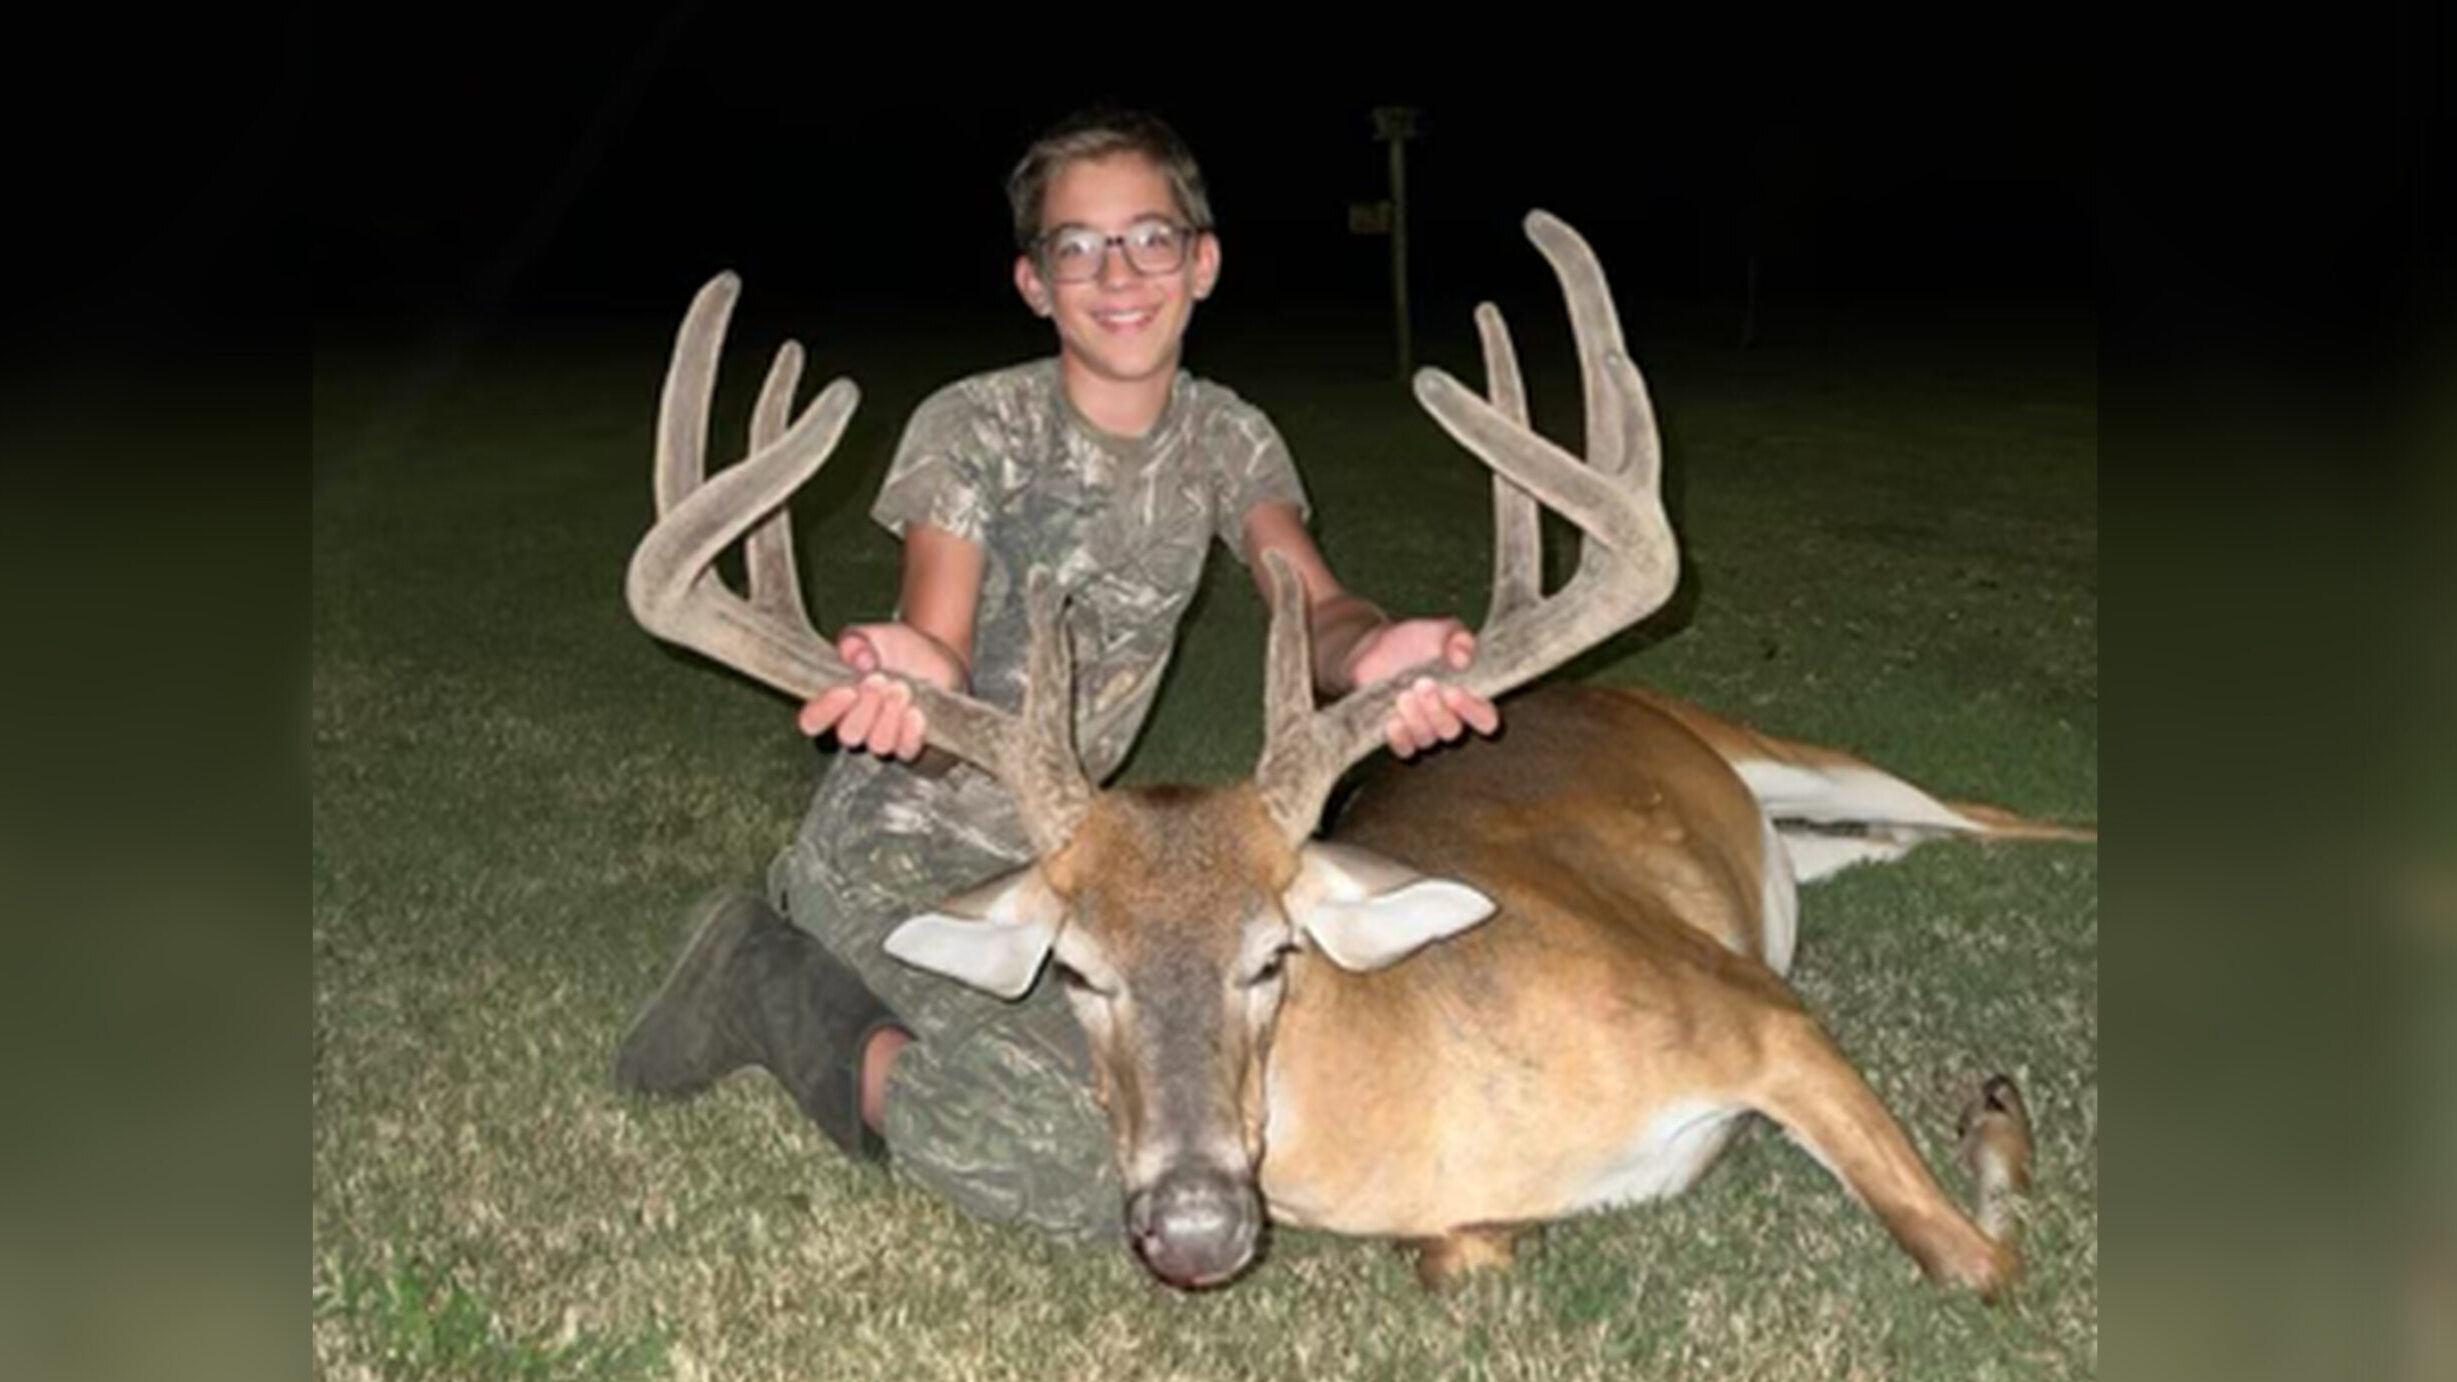 South Carolina Youth Hunter with his first buck.